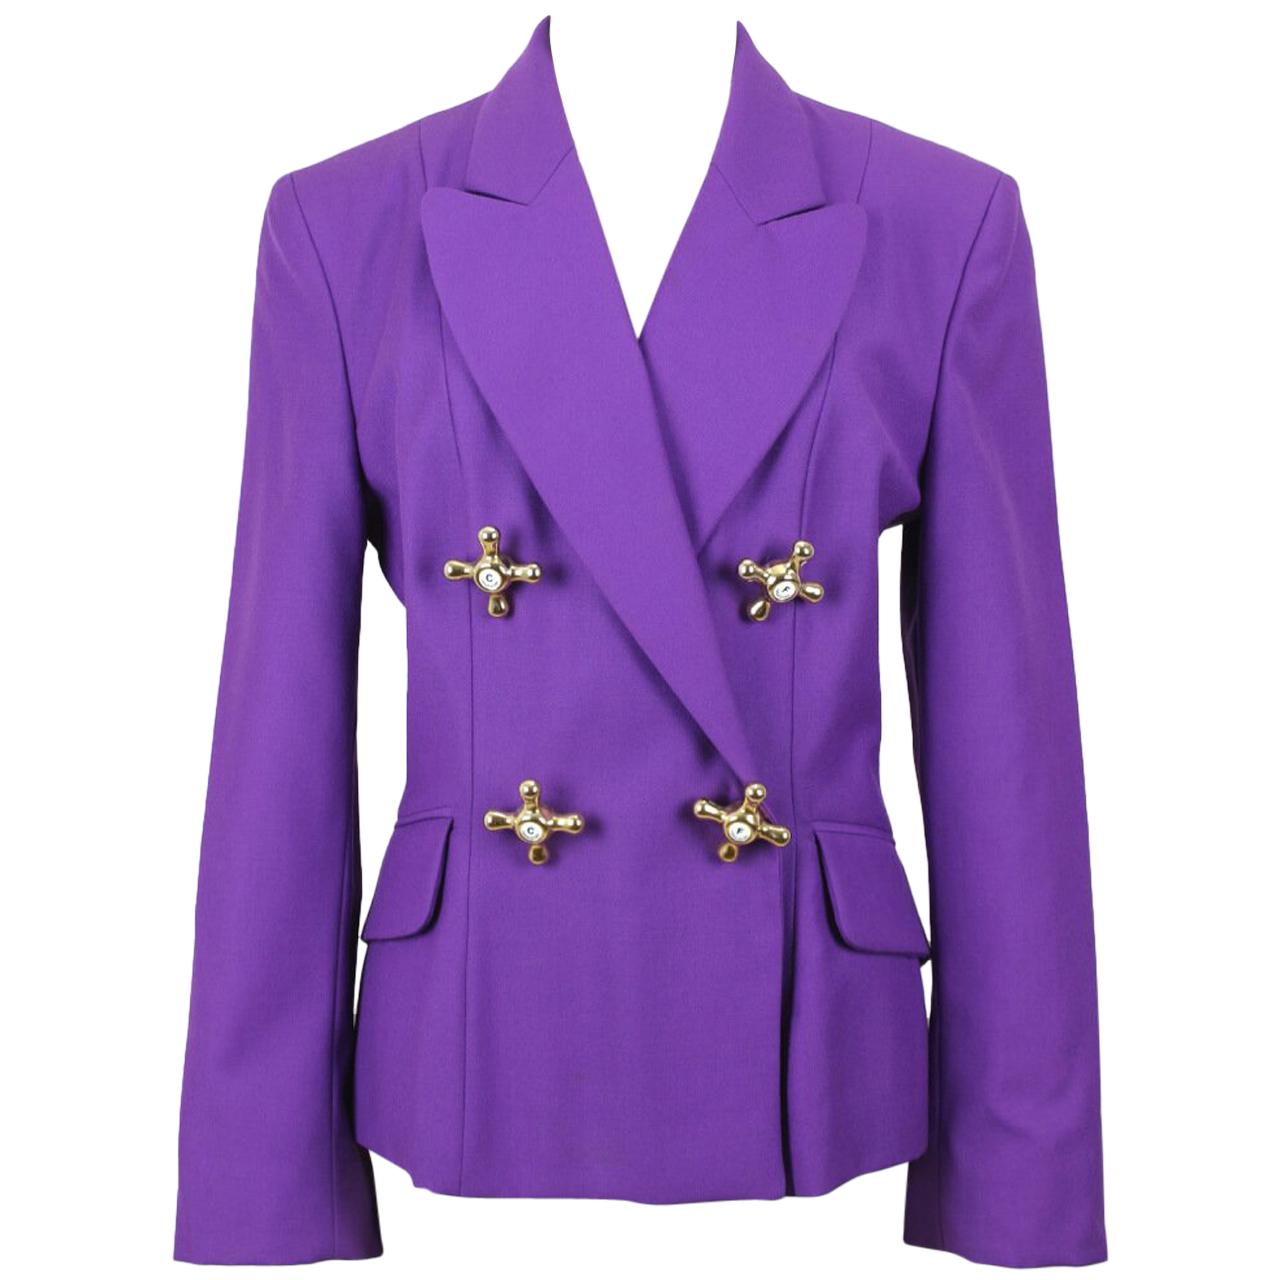 A/W 1991 Moschino Cheap & Chic Purple Wool Faucet Handle Jacket